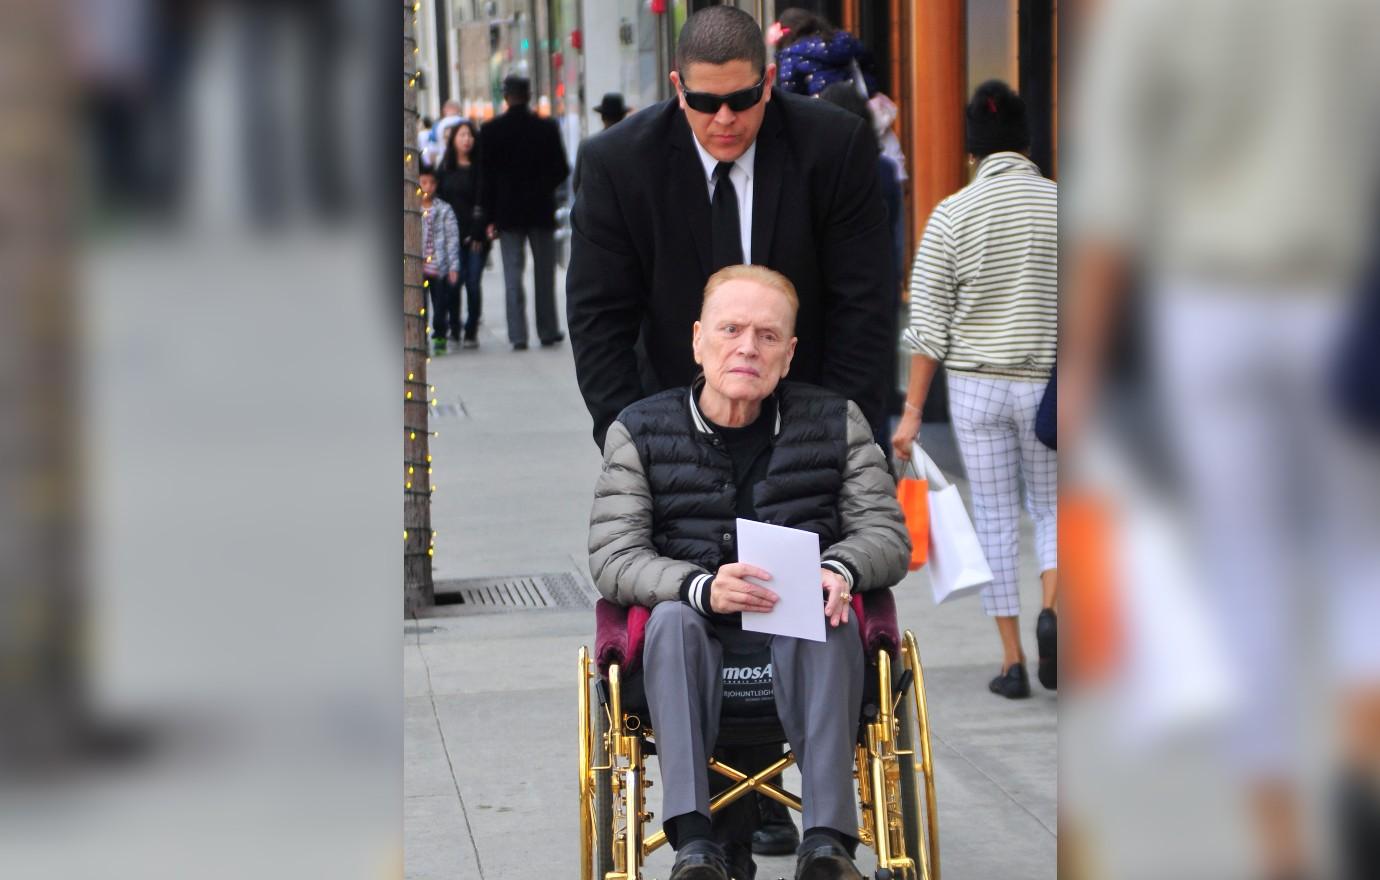 Larry Flynts Brother Drops Battle With Late Publishers Widow Over Hustler Fortune Without Receiving a Single Penny